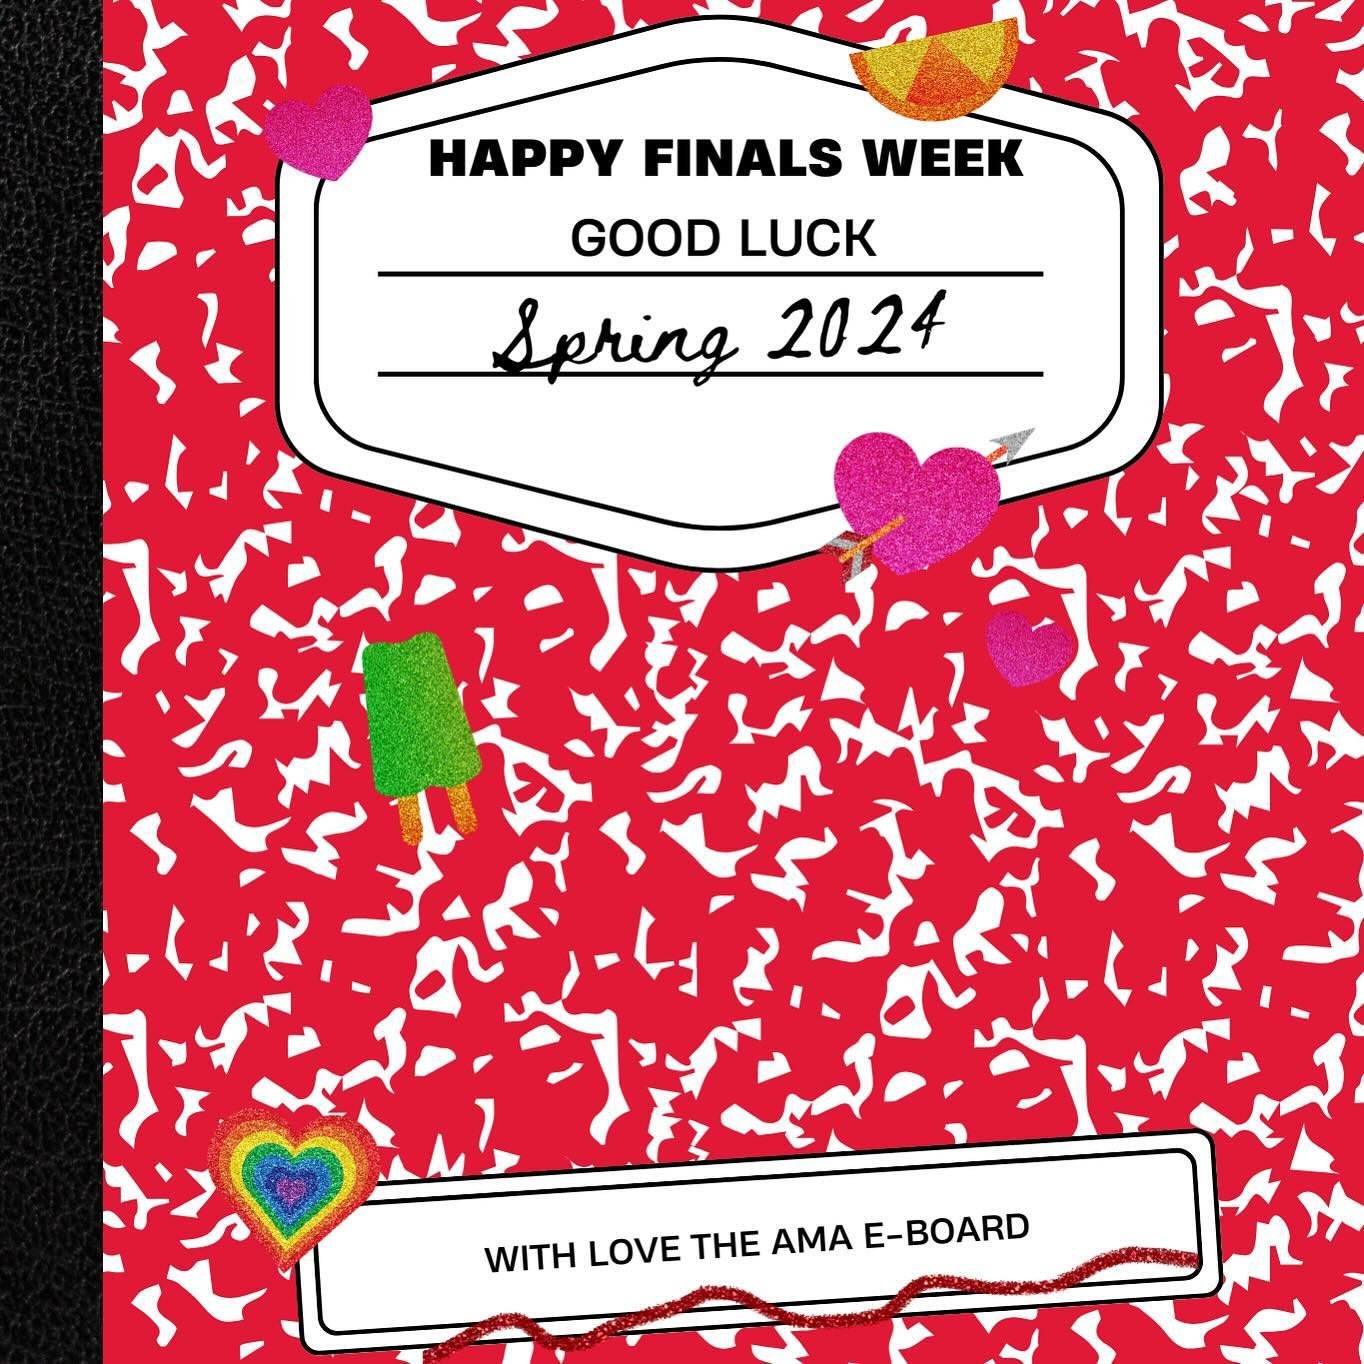 HAPPY FINALS WEEK! 📚

Good luck on finals week! You got this. Don&rsquo;t stress. ✍🏽

Remember to prioritize yourself and get some proper rest. We hope everyone has a wonderful summer.❤️

With love,
The AMA E-board! 
#finals #finalsweek #studytime 